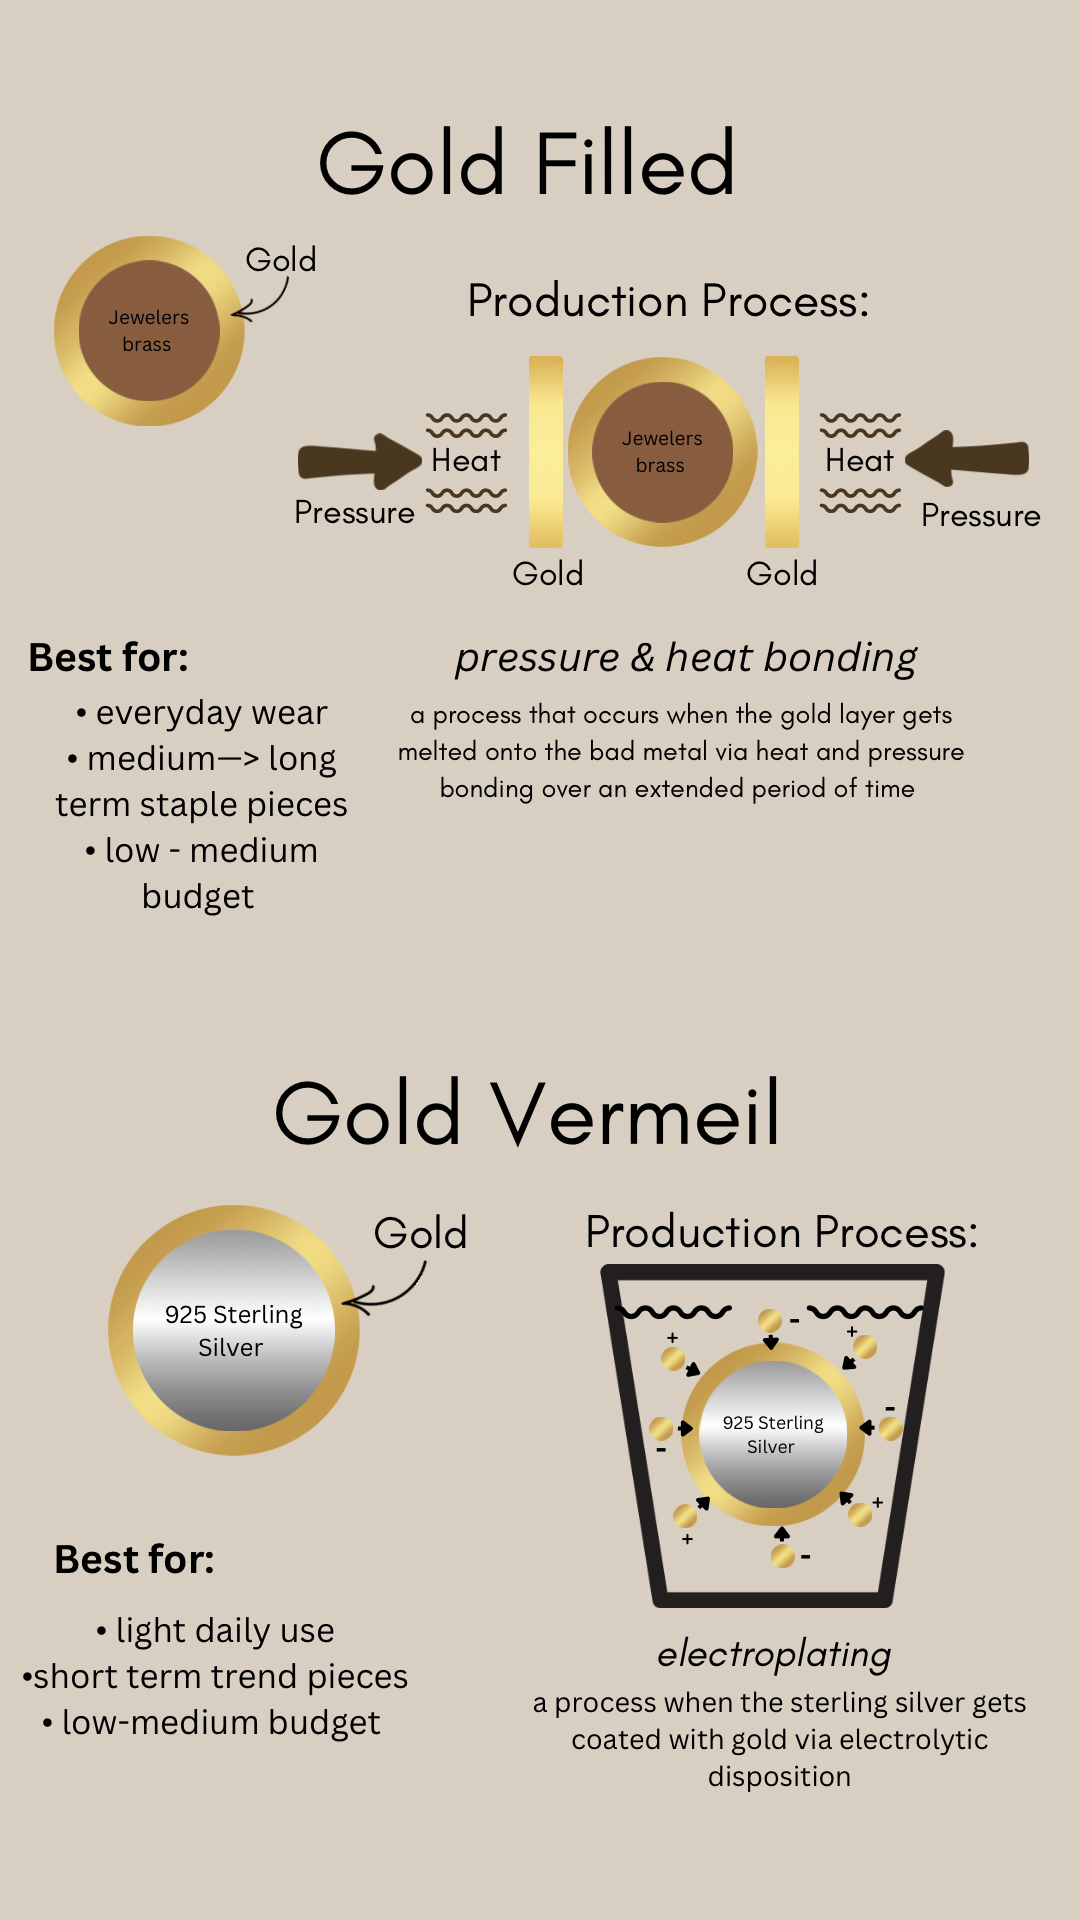 Gold Charms & Gold Findings in 14k gold, vermeil, gold filled